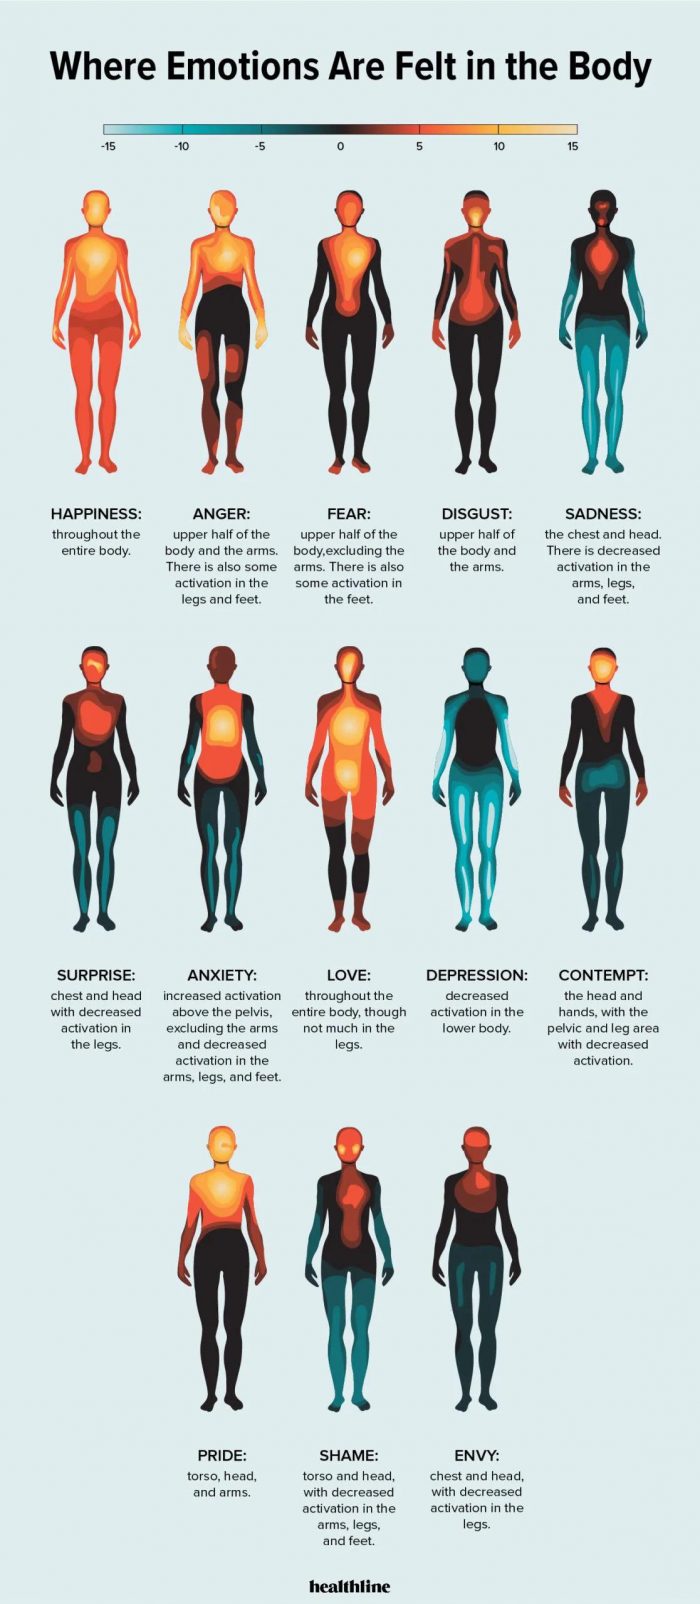 Where emotions are felt in the body